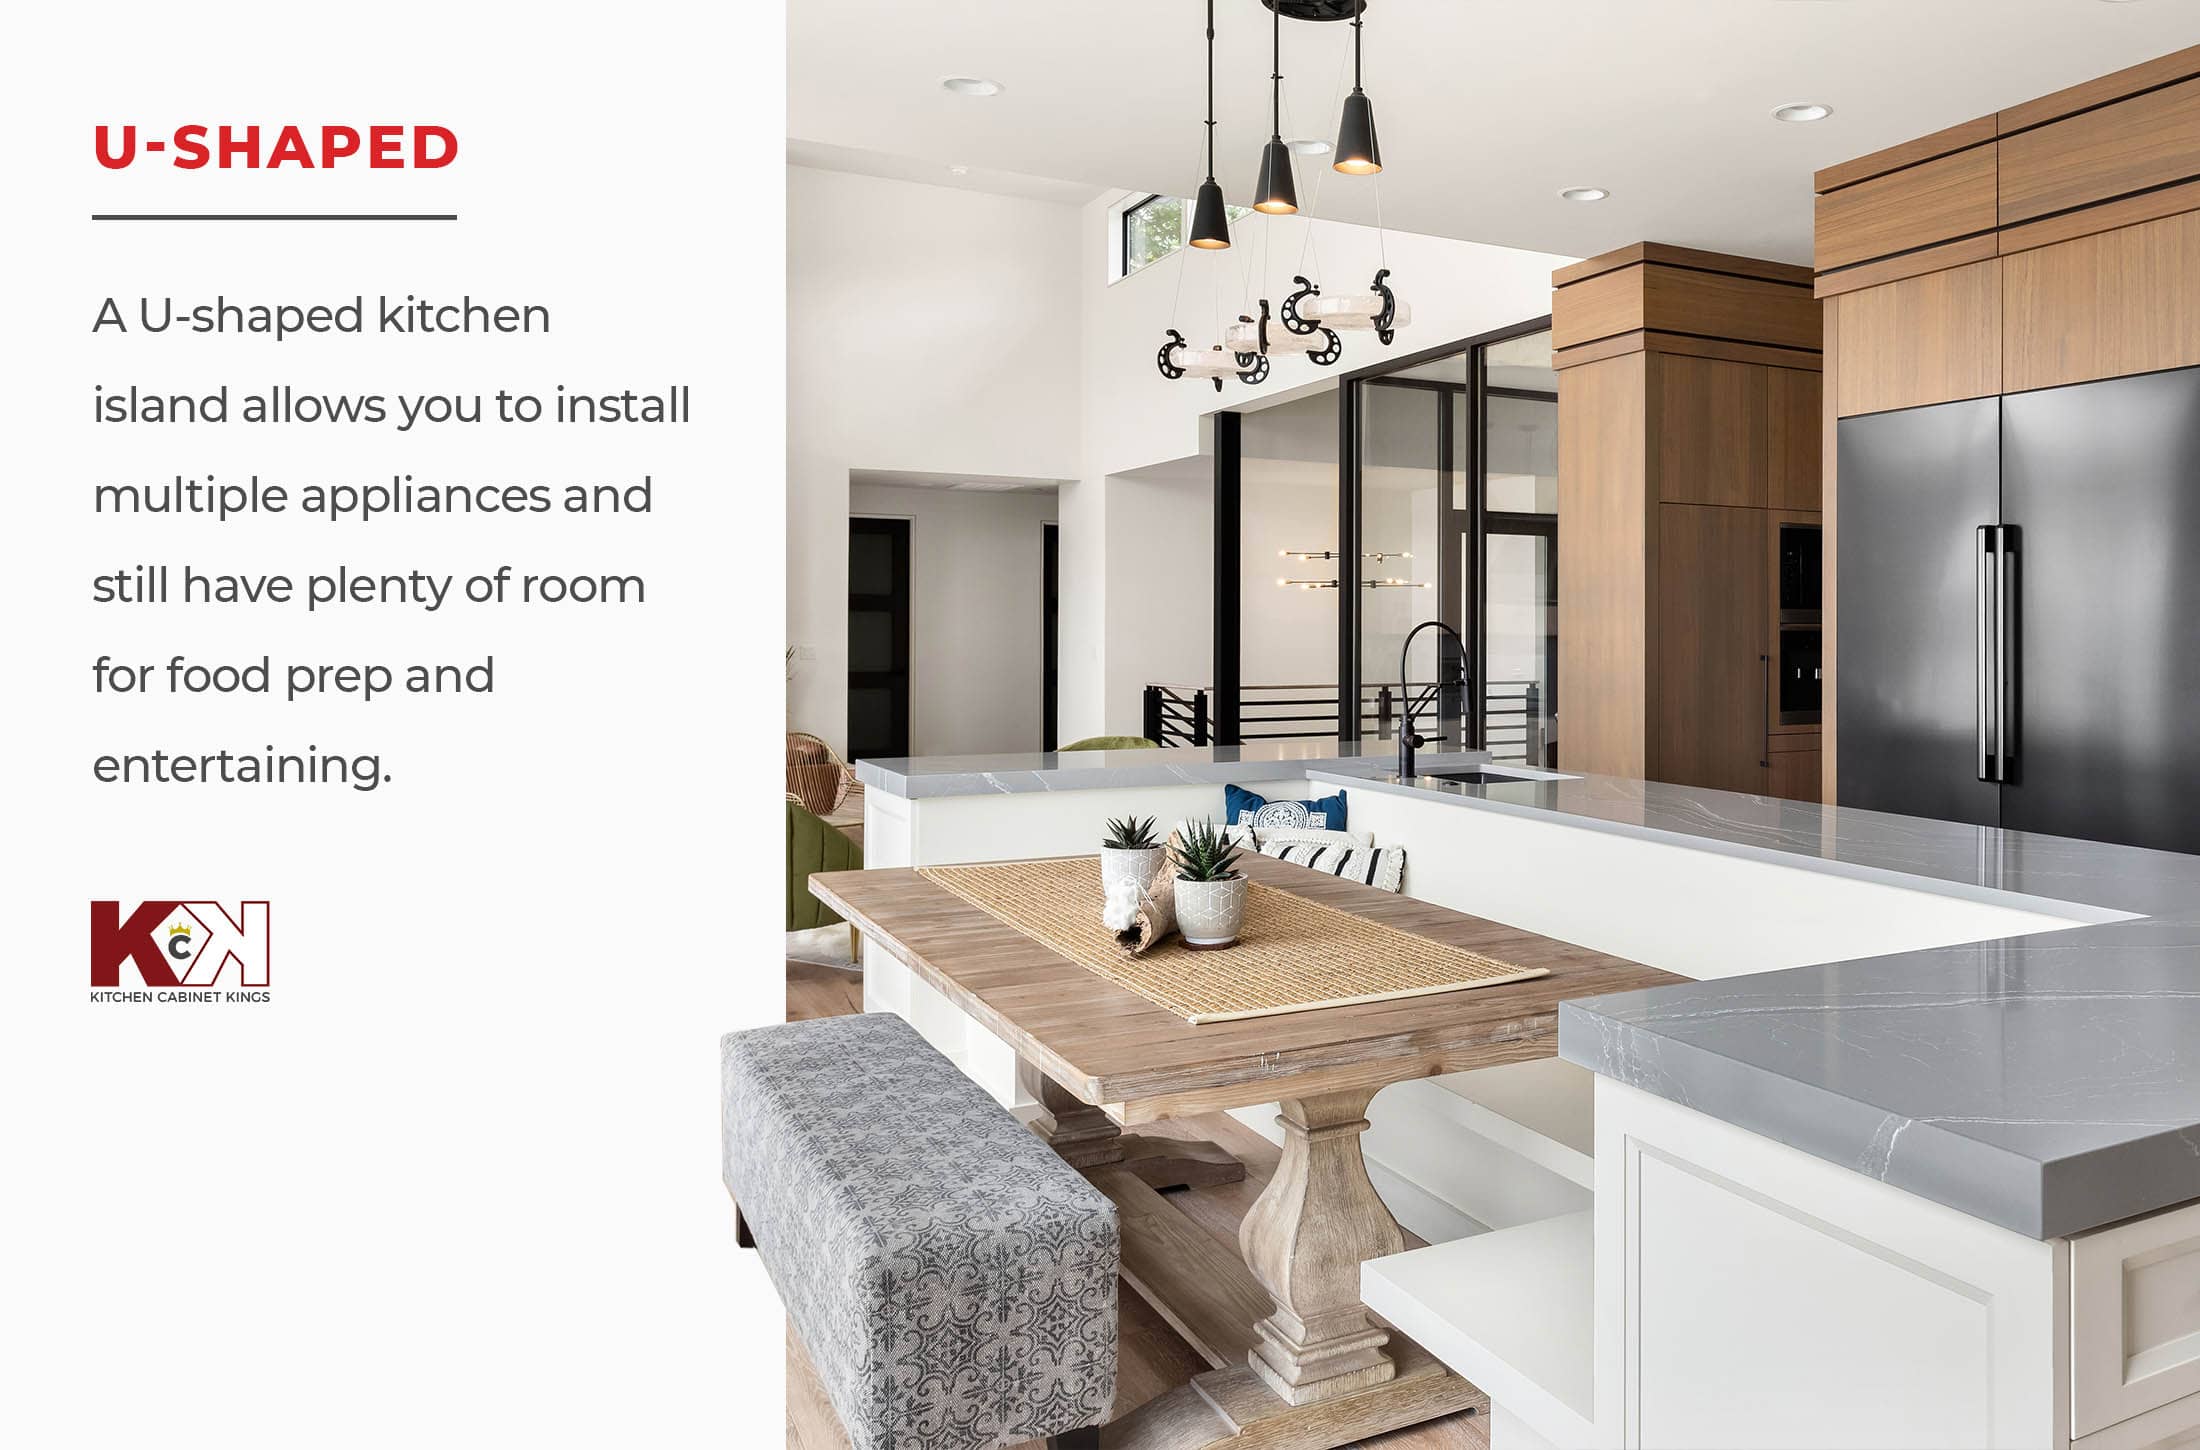 Image of u-shaped kitchen island with definition.